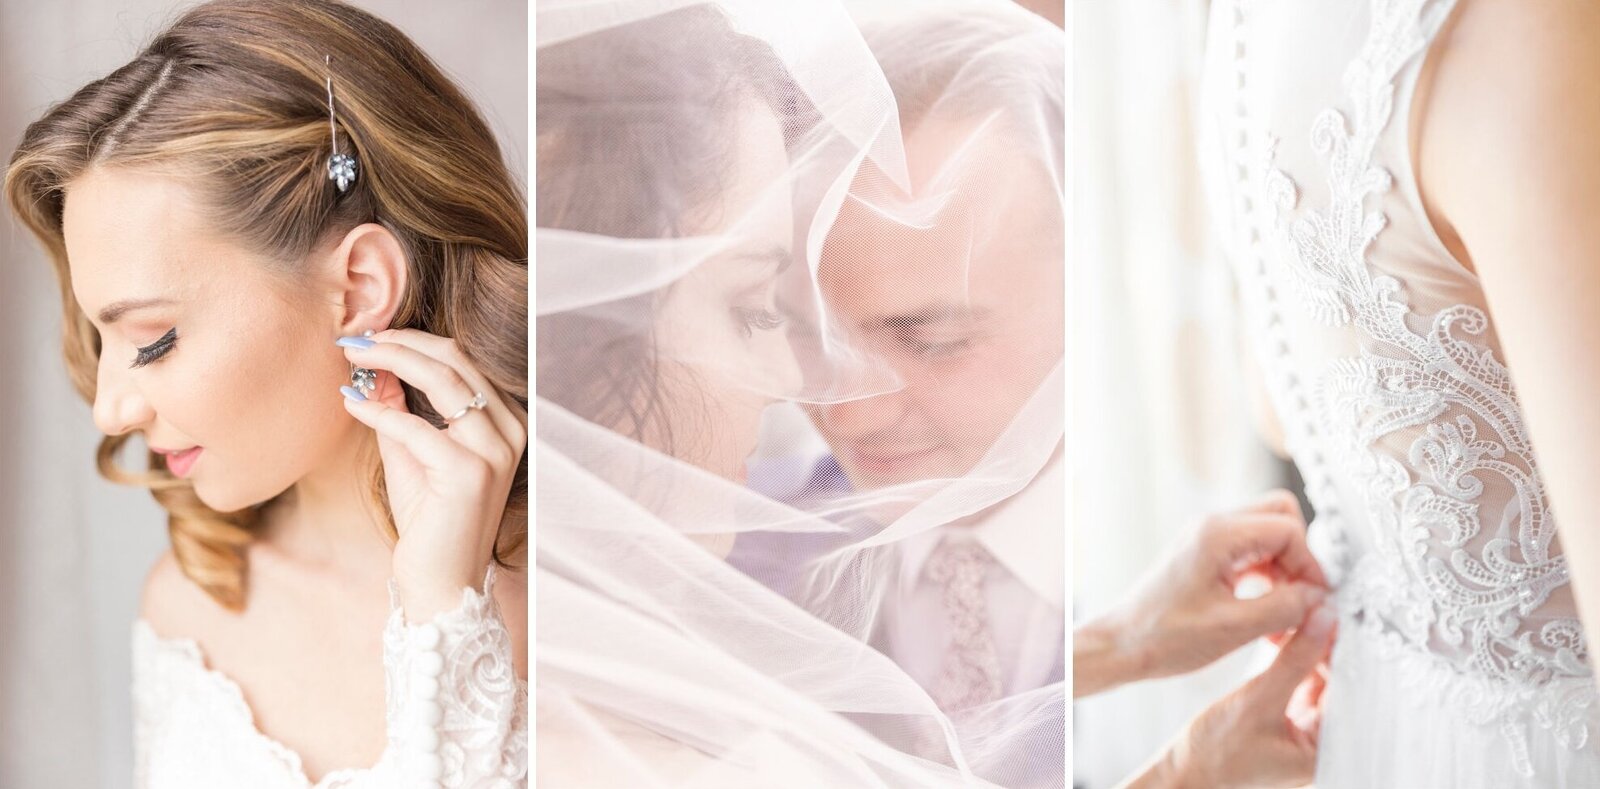 Mini Gallery of Sullivan Photography Luxury Wedding Portraits - Bride, Bride & Groom First Look with Veil, Mother Buttoning Bride's Wedding Dress